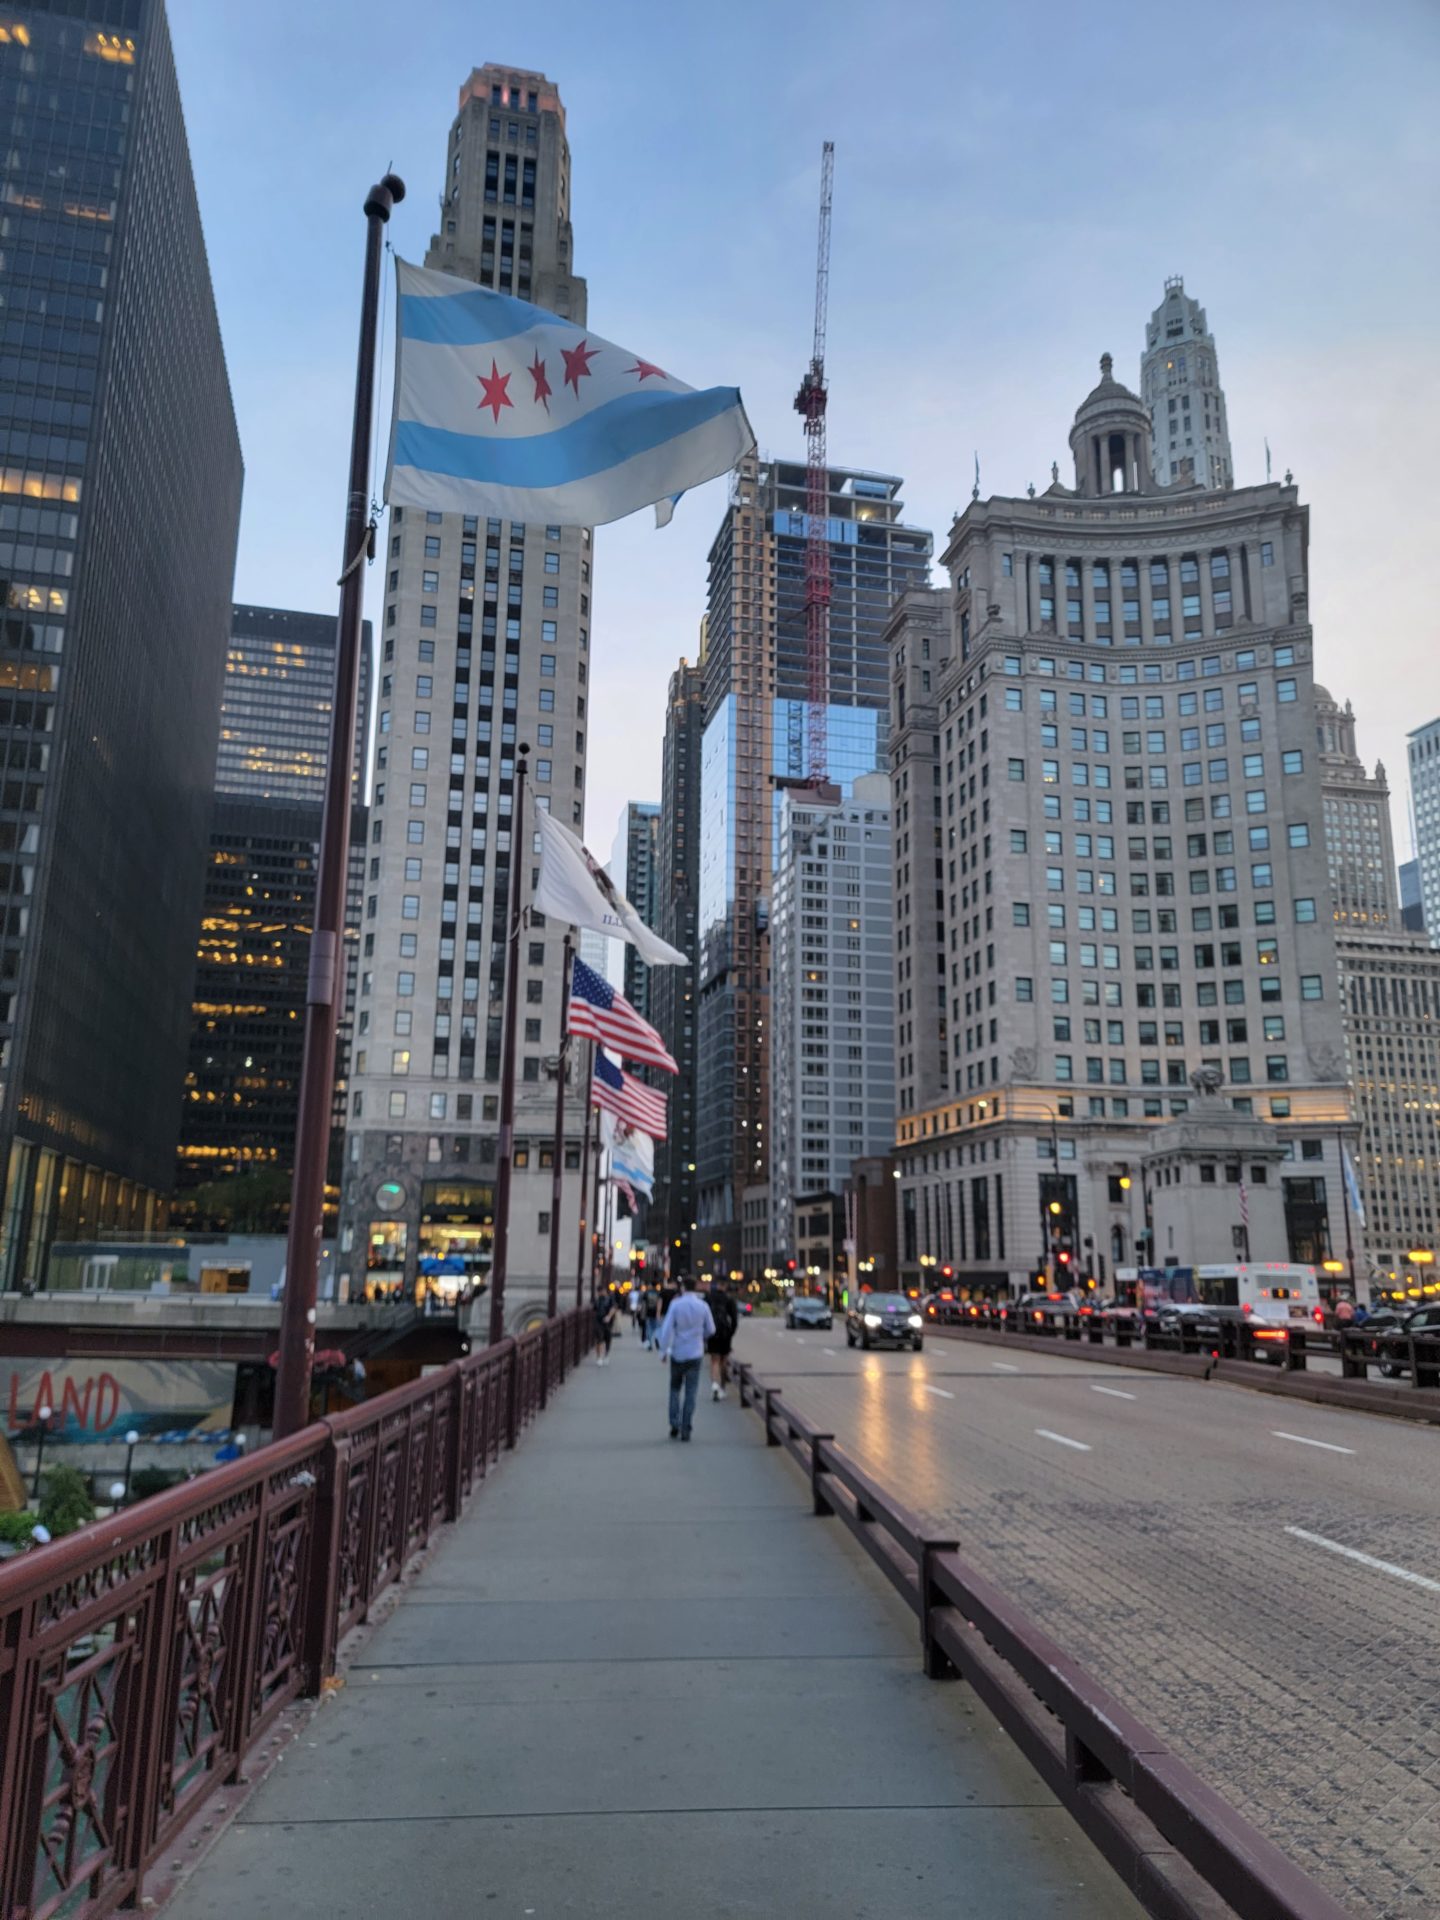 a bridge with flags on it and a city street with tall buildings